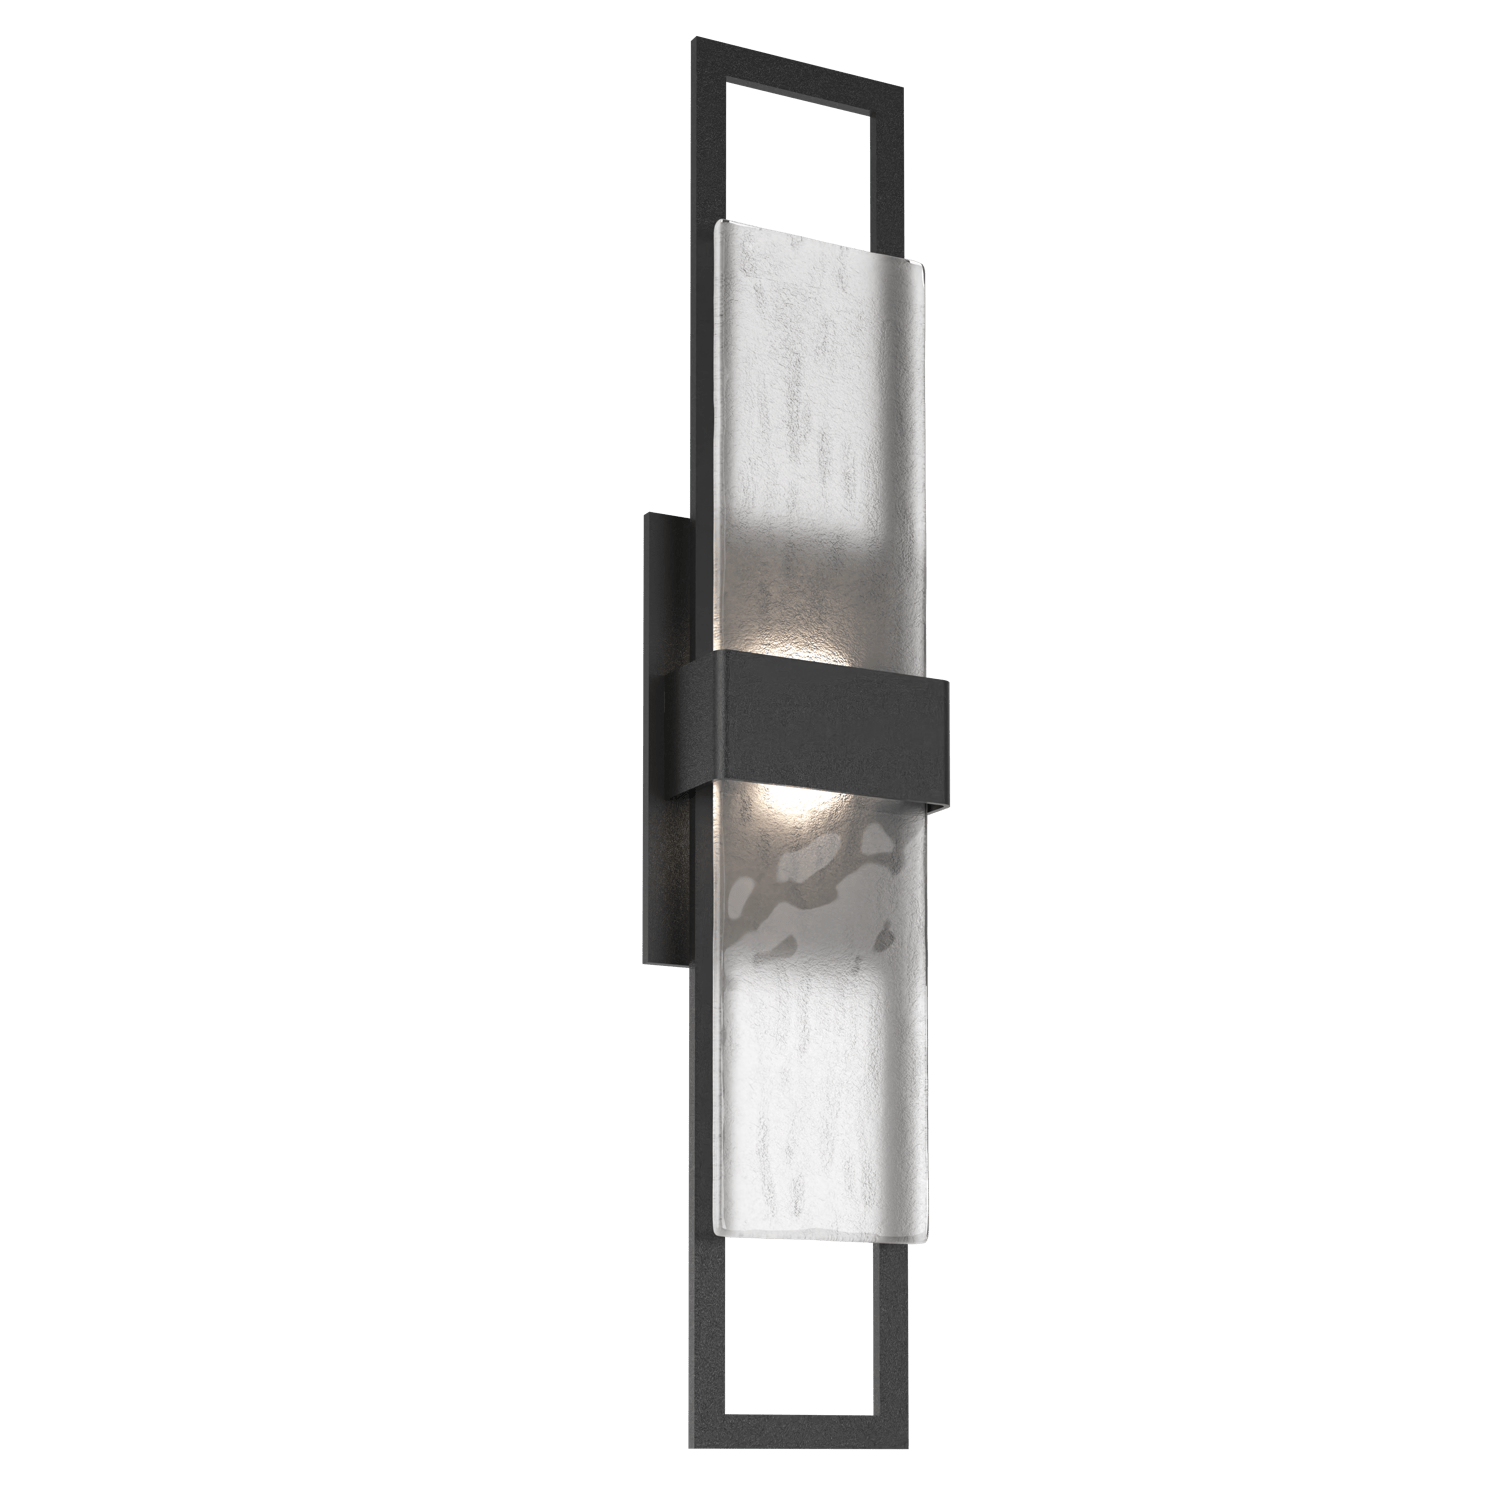 ODB0085-02-TB-CG-Hammerton-Studio-Sasha-28-inch-outdoor-sconce-with-textured-black-finish-and-clear-granite-glass-shades-and-LED-lamping